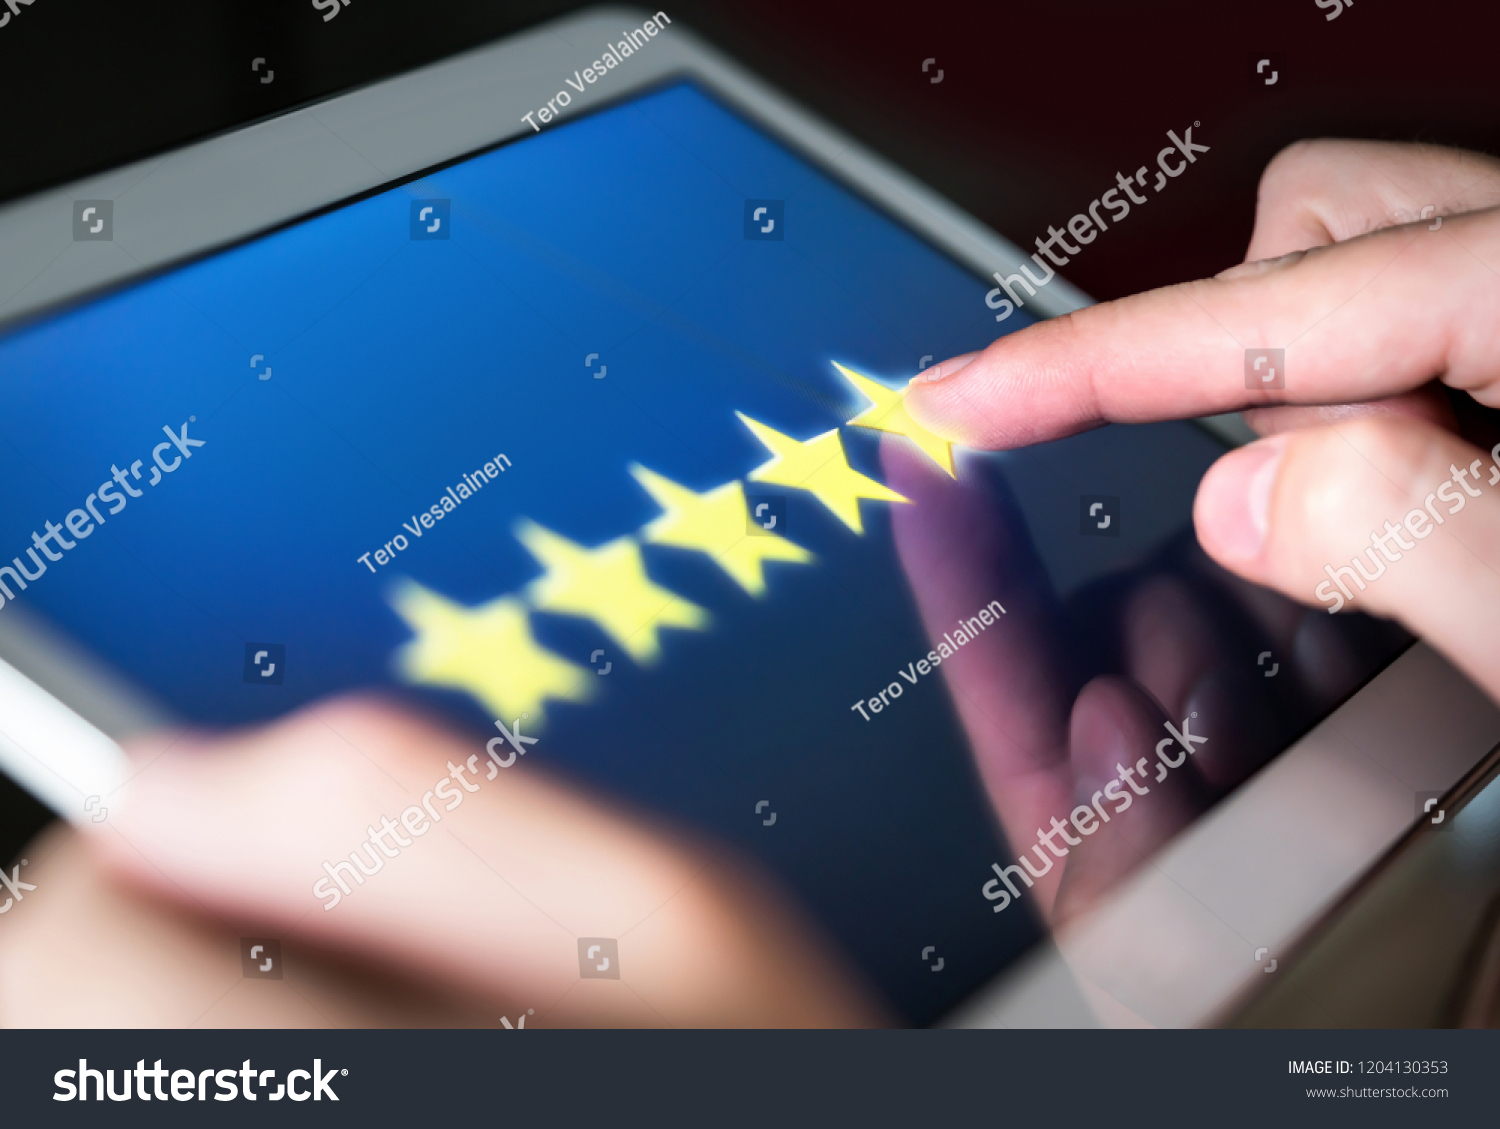 5 star rating or review in survey, poll, questionnaire or customer satisfaction research. Happy man giving positive feedback with tablet. Successful business with good reputation. Good experience. #1204130353